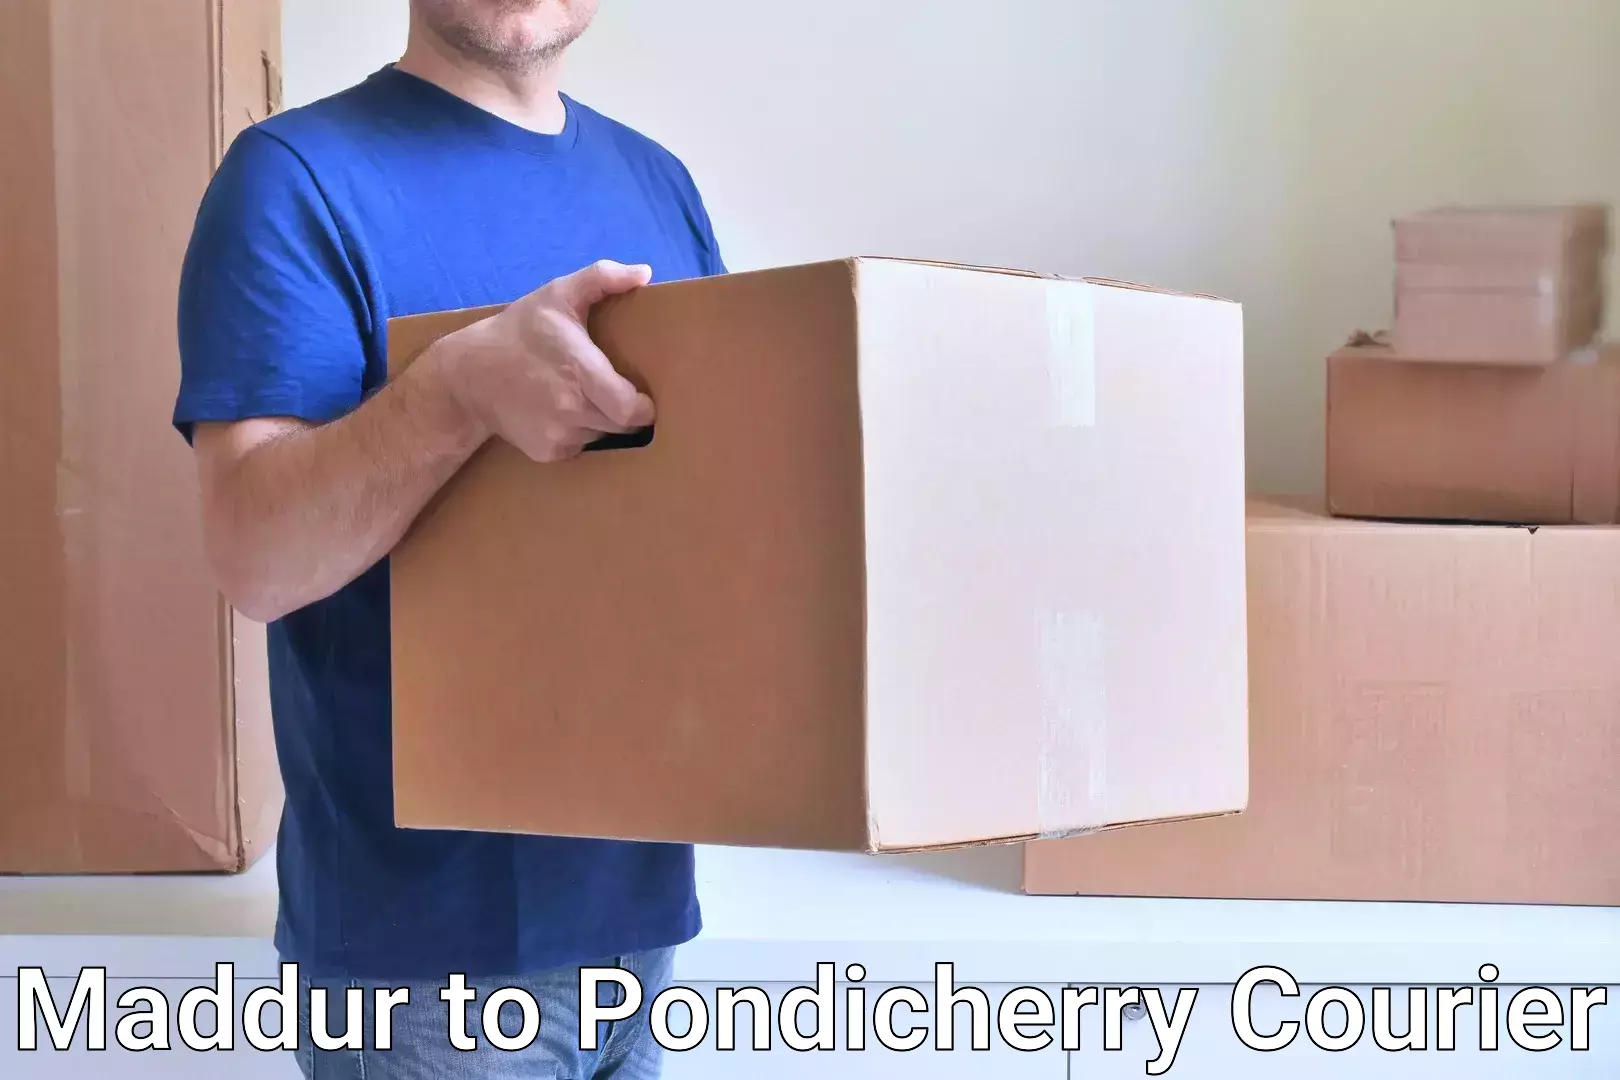 Local delivery service in Maddur to Pondicherry University